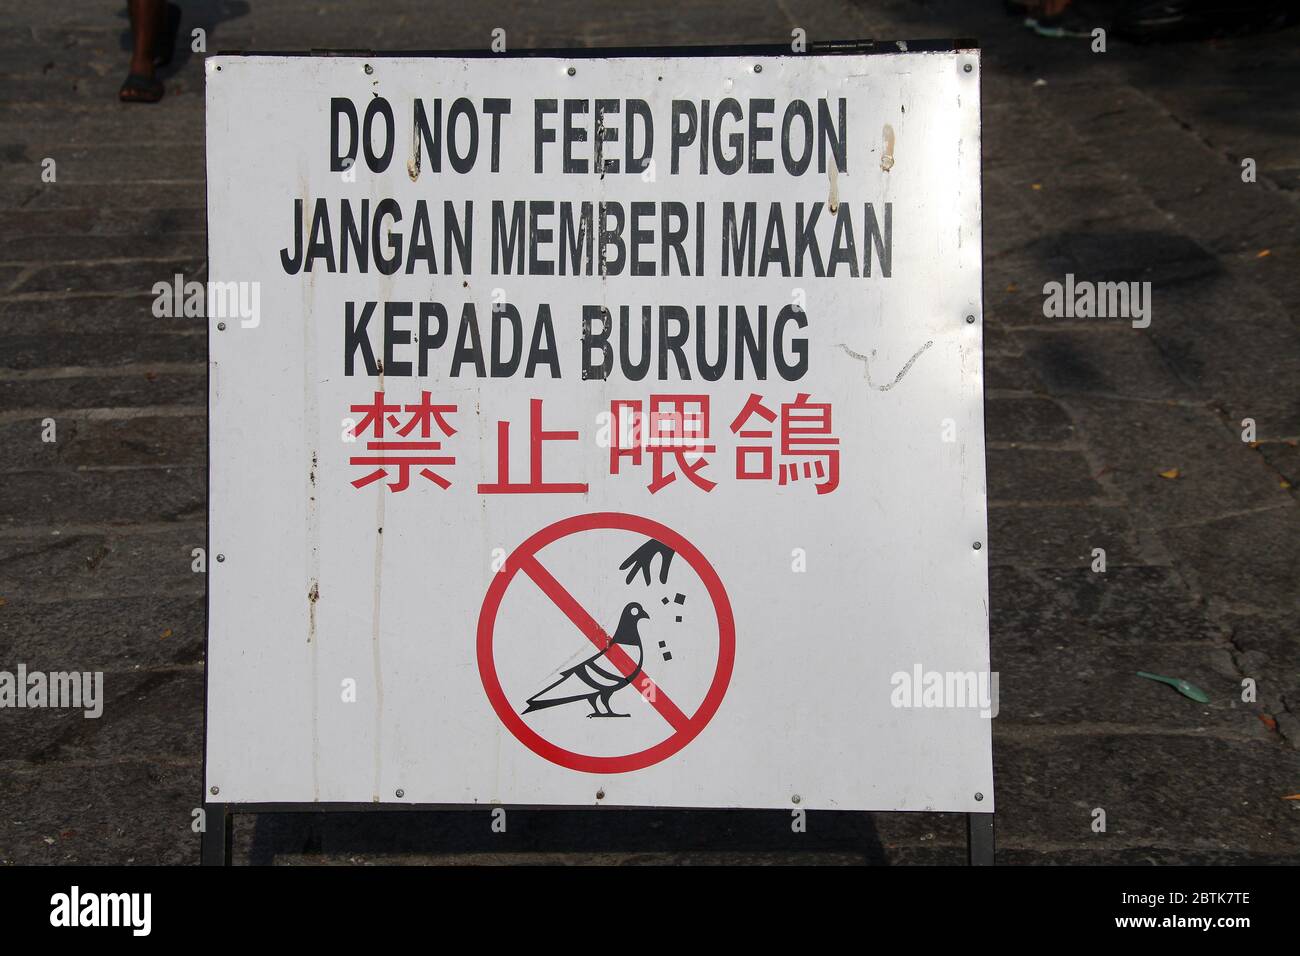 Do not feed pigeon sign in Malaysia Stock Photo